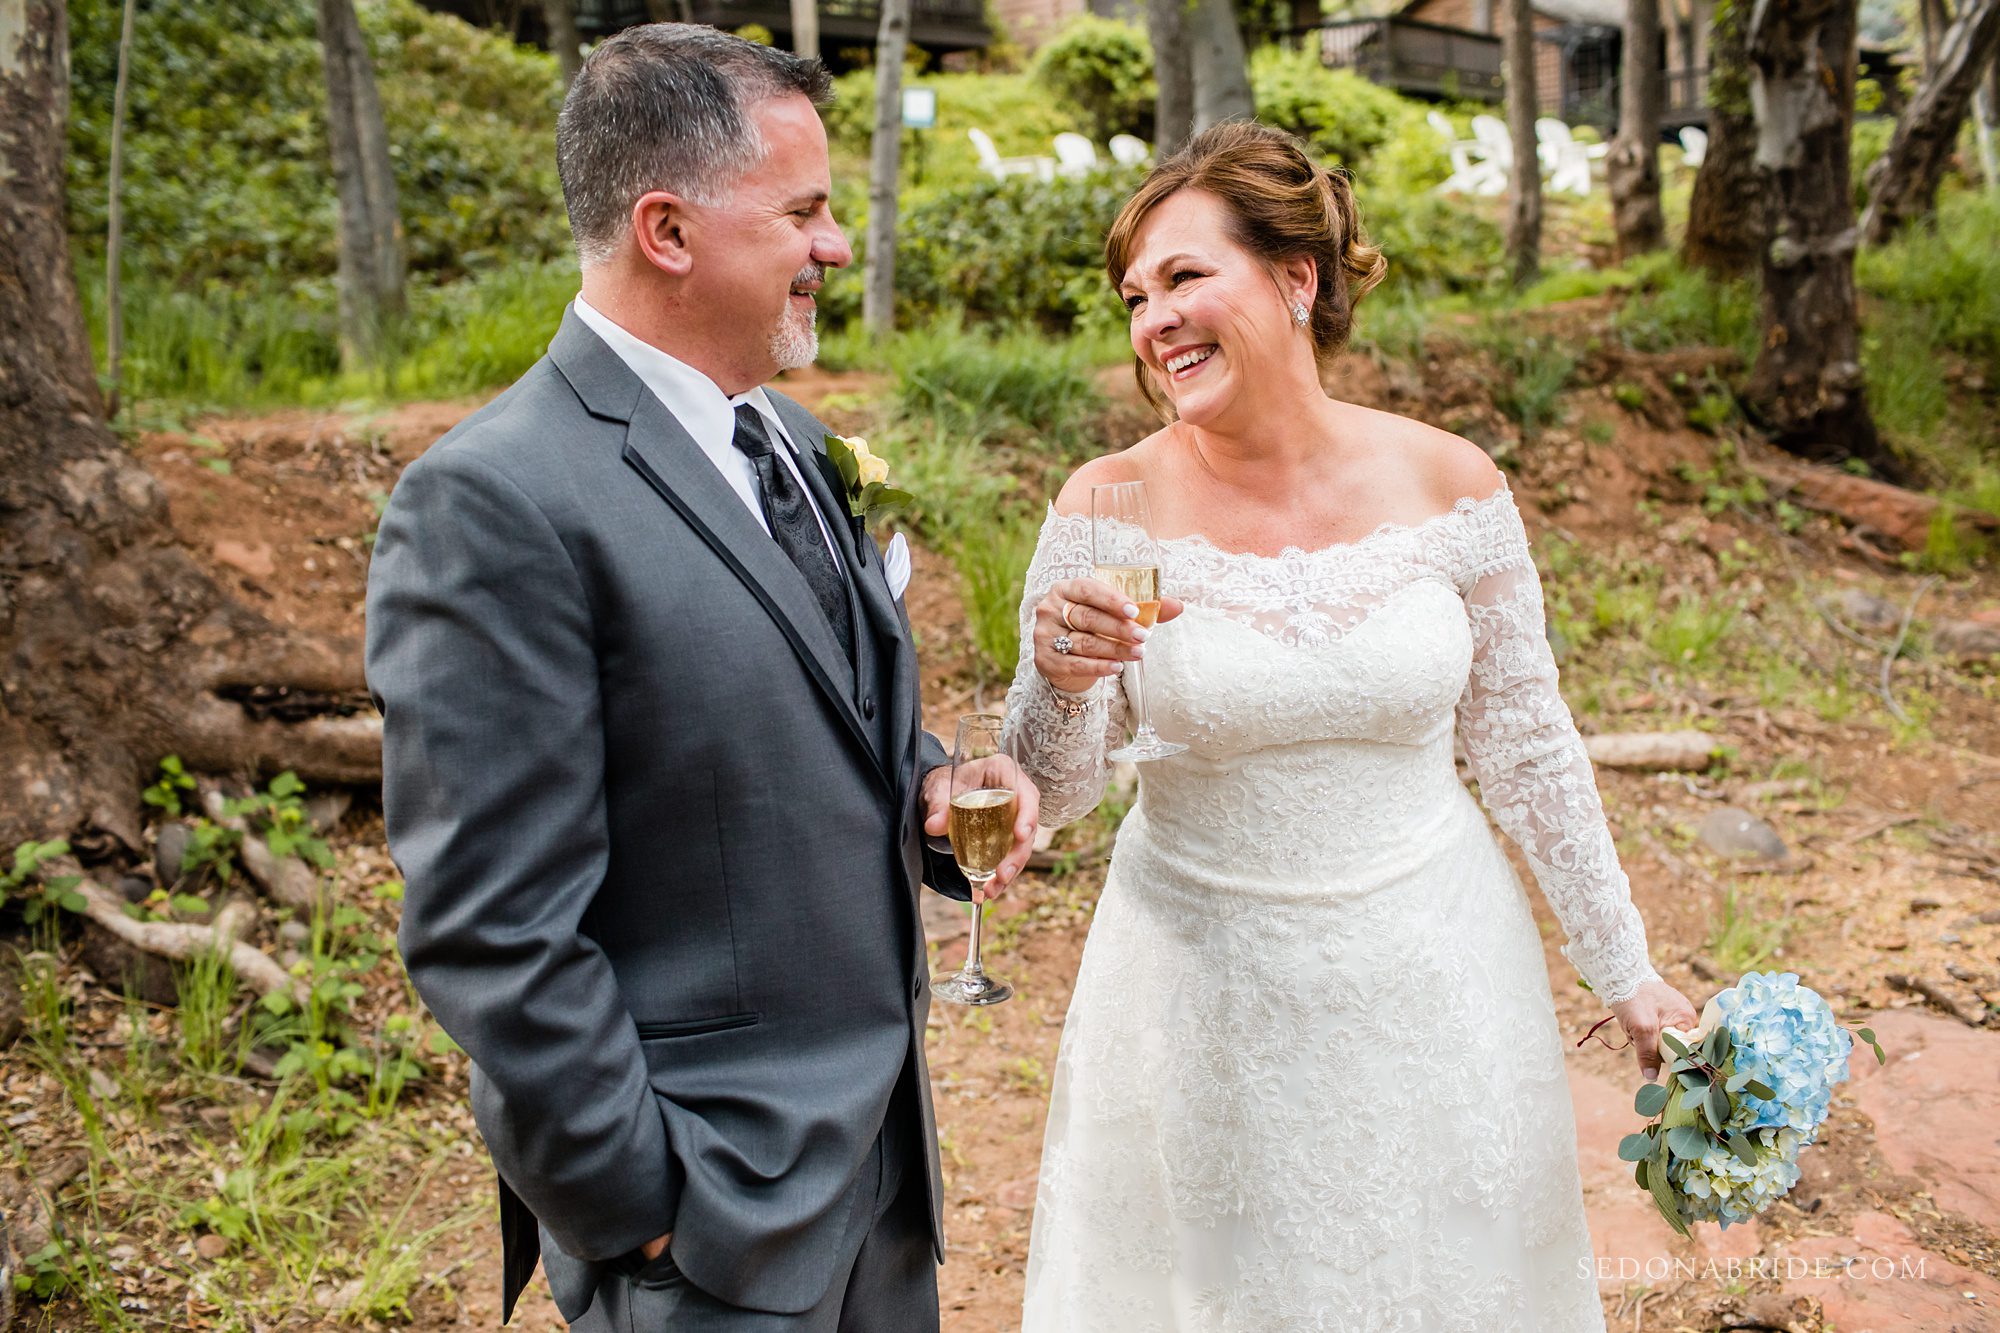 Groom in a grey suit and bride in off the white wedding dress laughing together